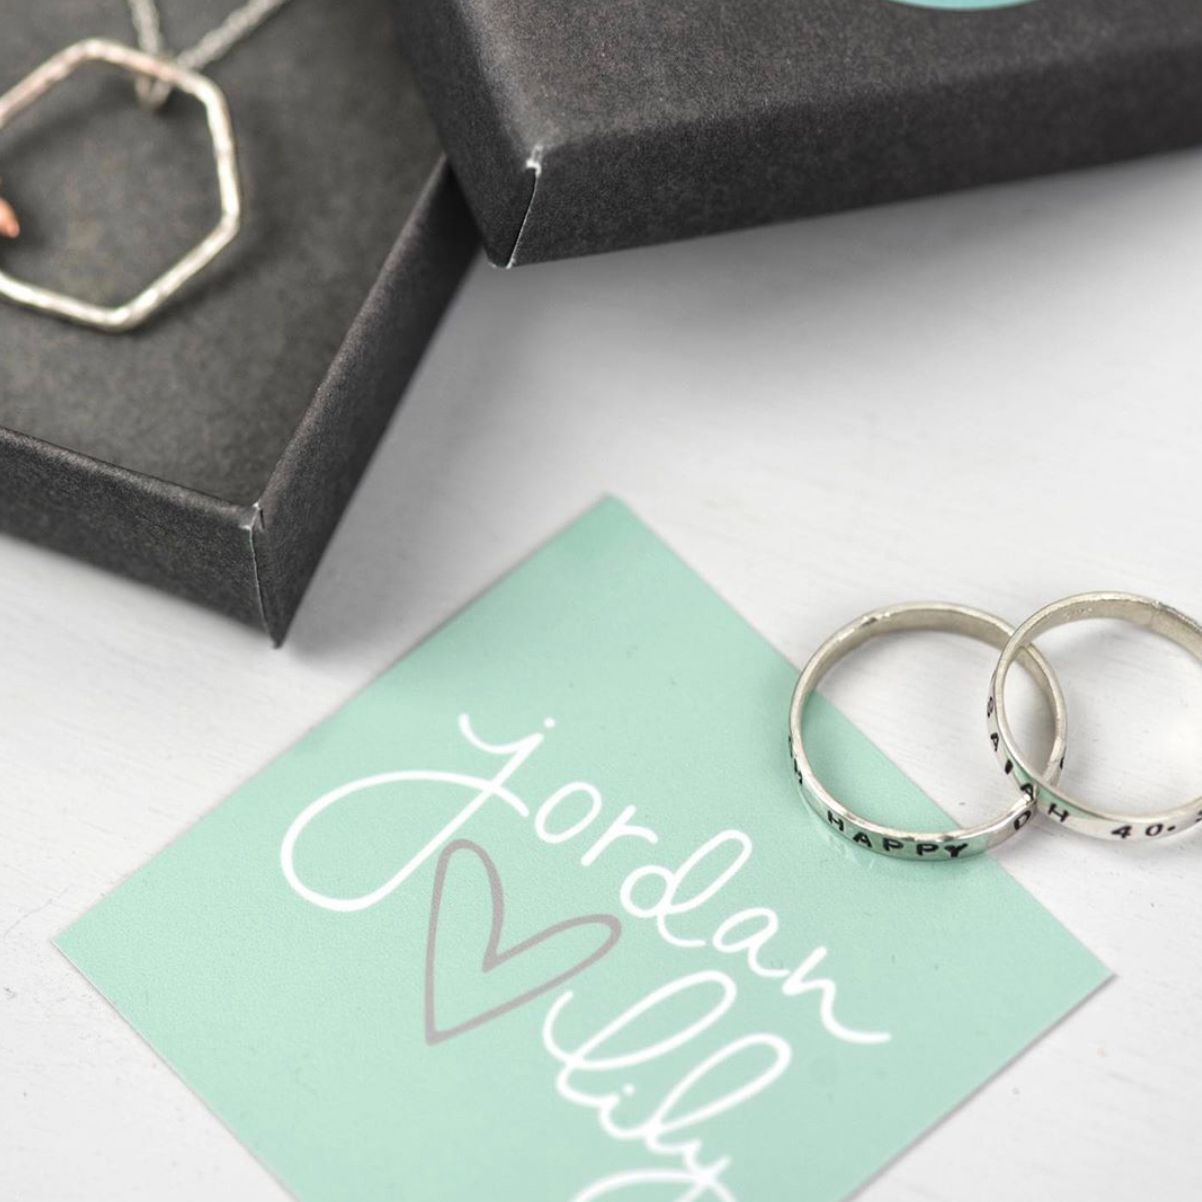 Top Tips For Designing A Business Card For Your Handmade Jewellery Business